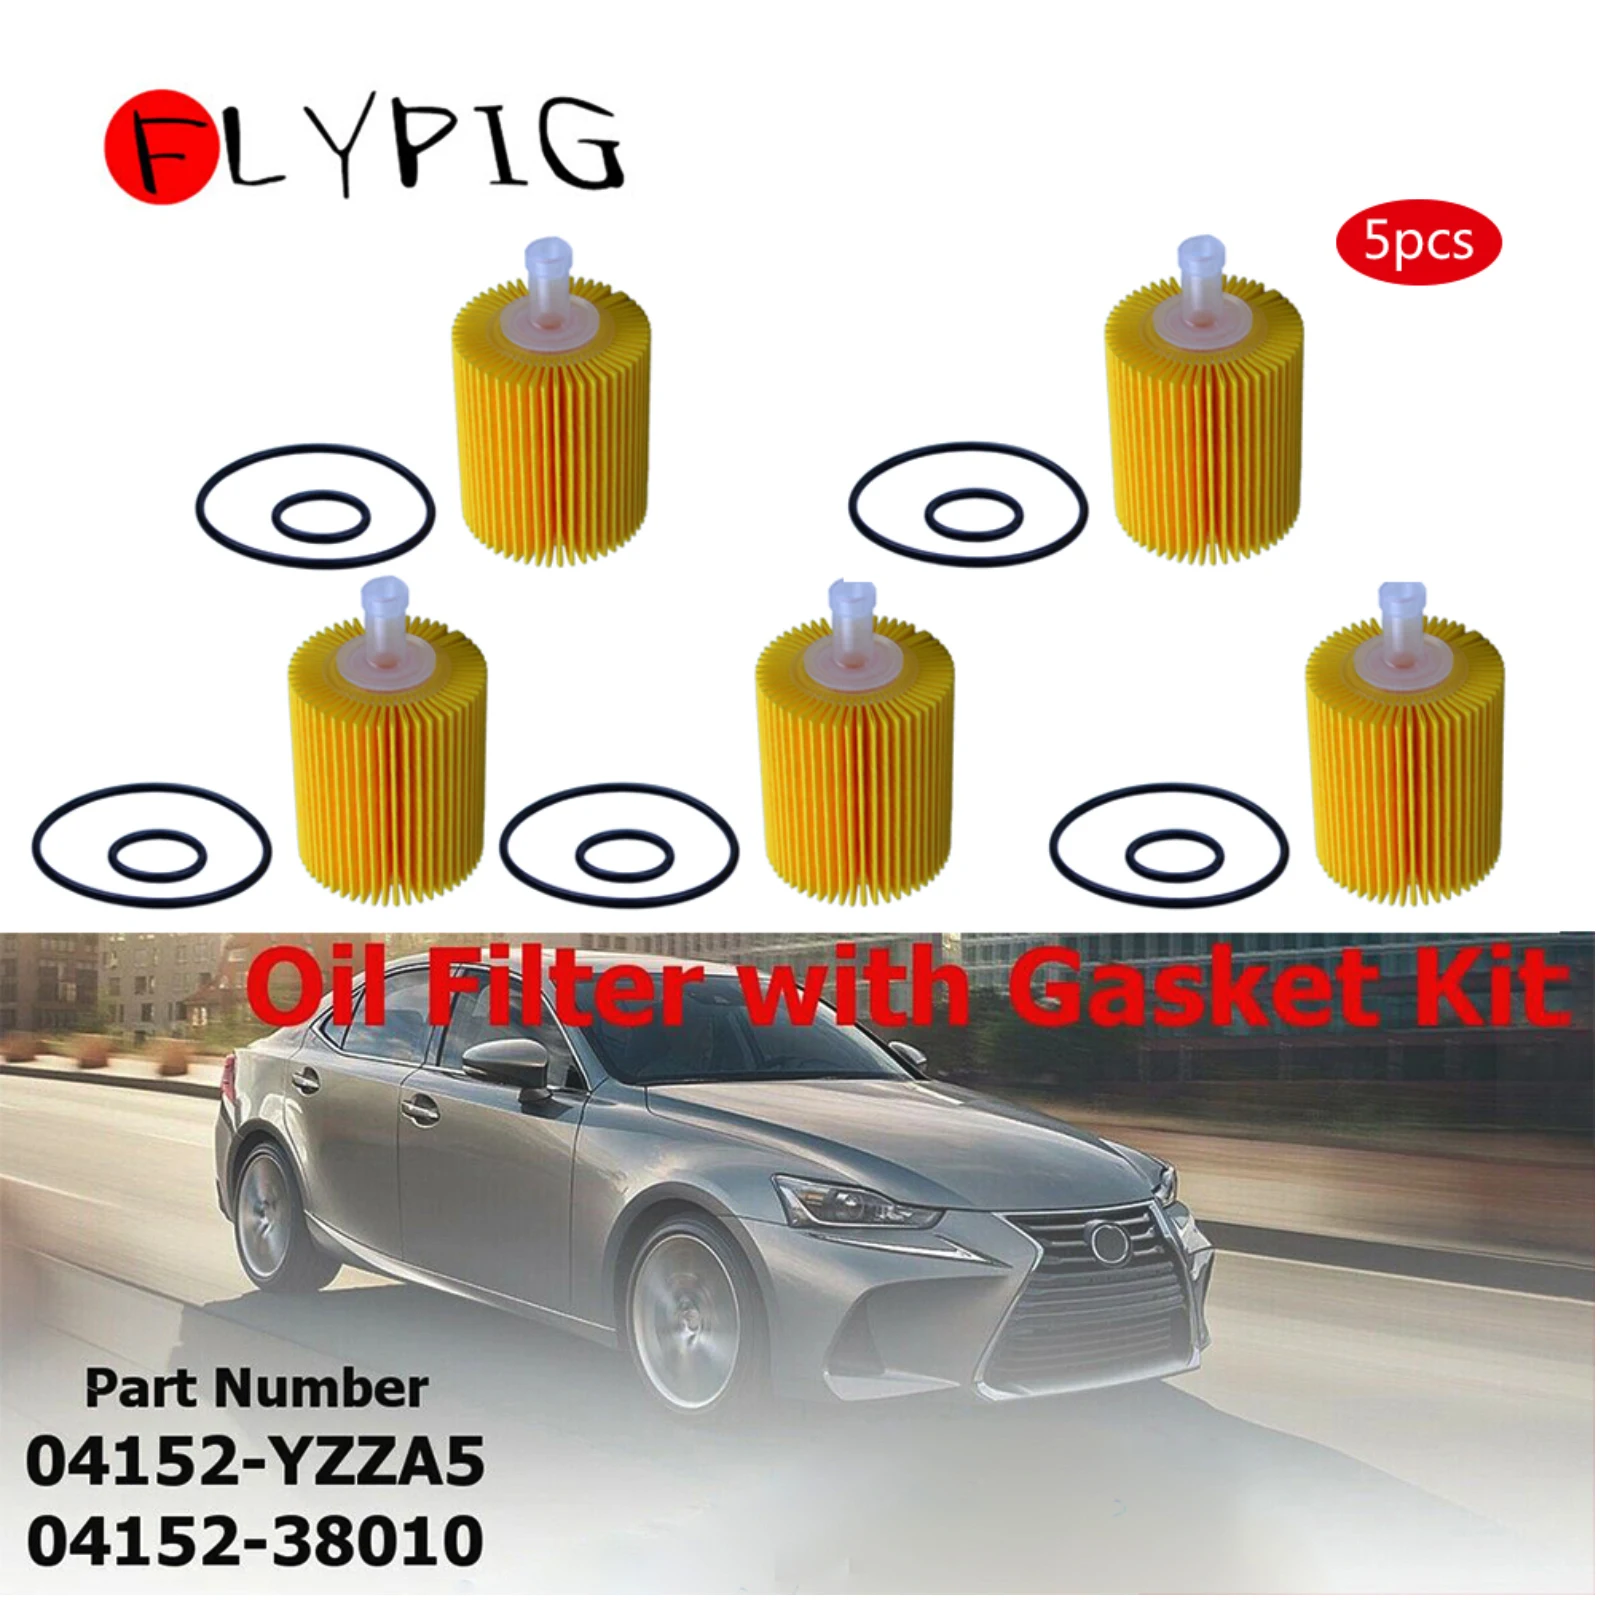 5Pcs Oil Filte 04152-YZZA5 04152-38010 For Toyota 4Runner Tundra Lexus LS600H IS350 IS250 GS350 GX460 LS460